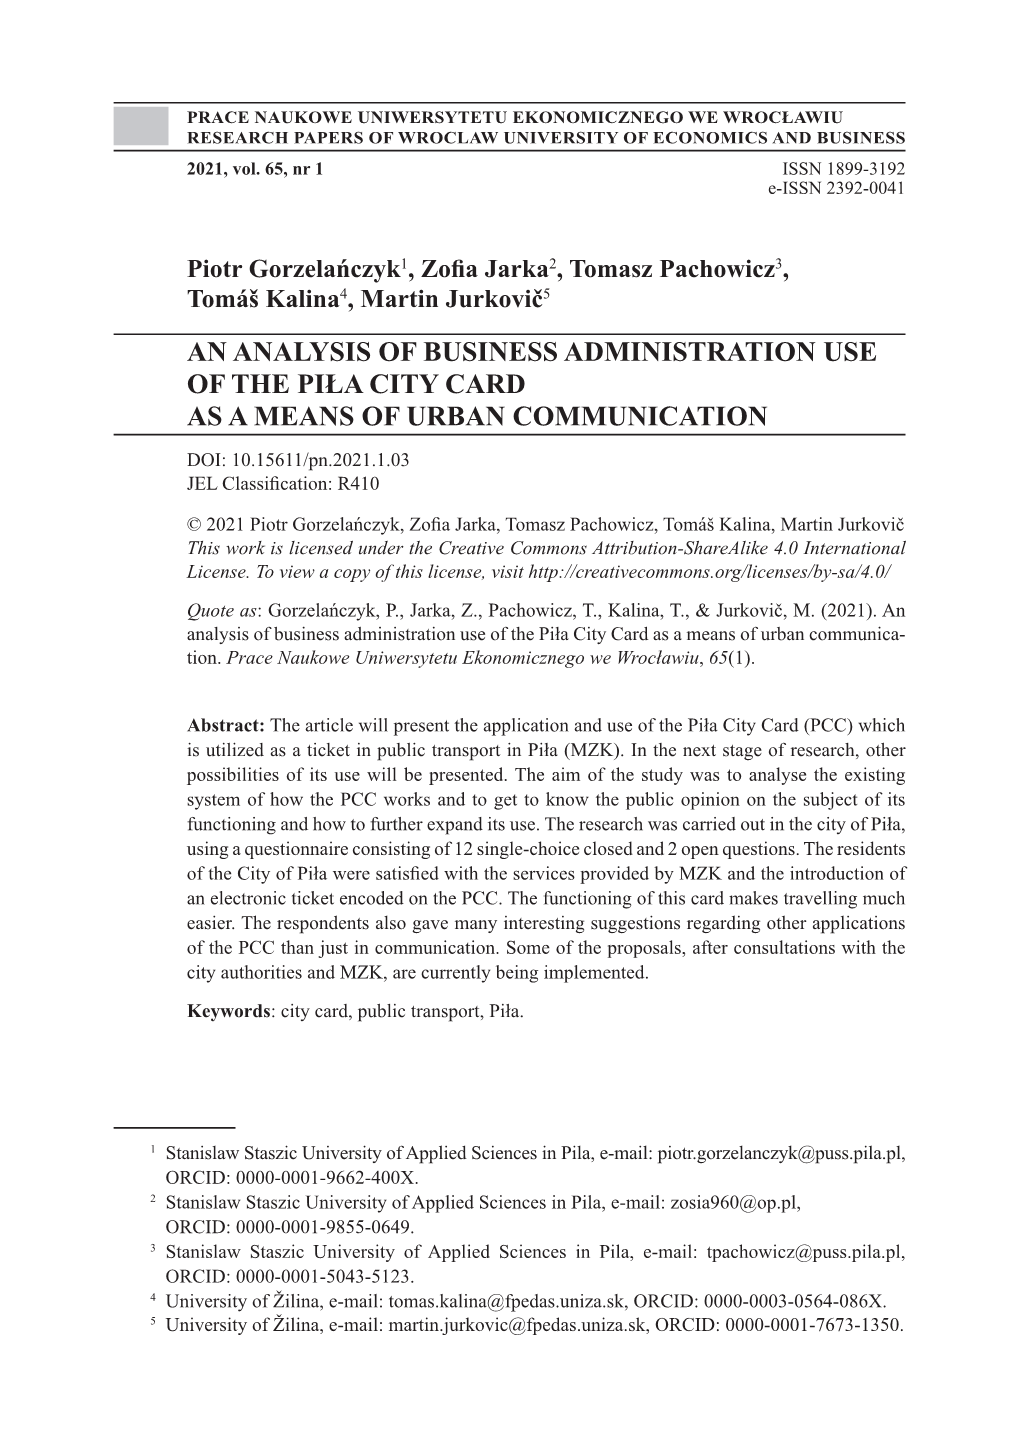 An Analysis of Business Administration Use of the Piła City Card As a Means of Urban Communication / Analiza Business Administr